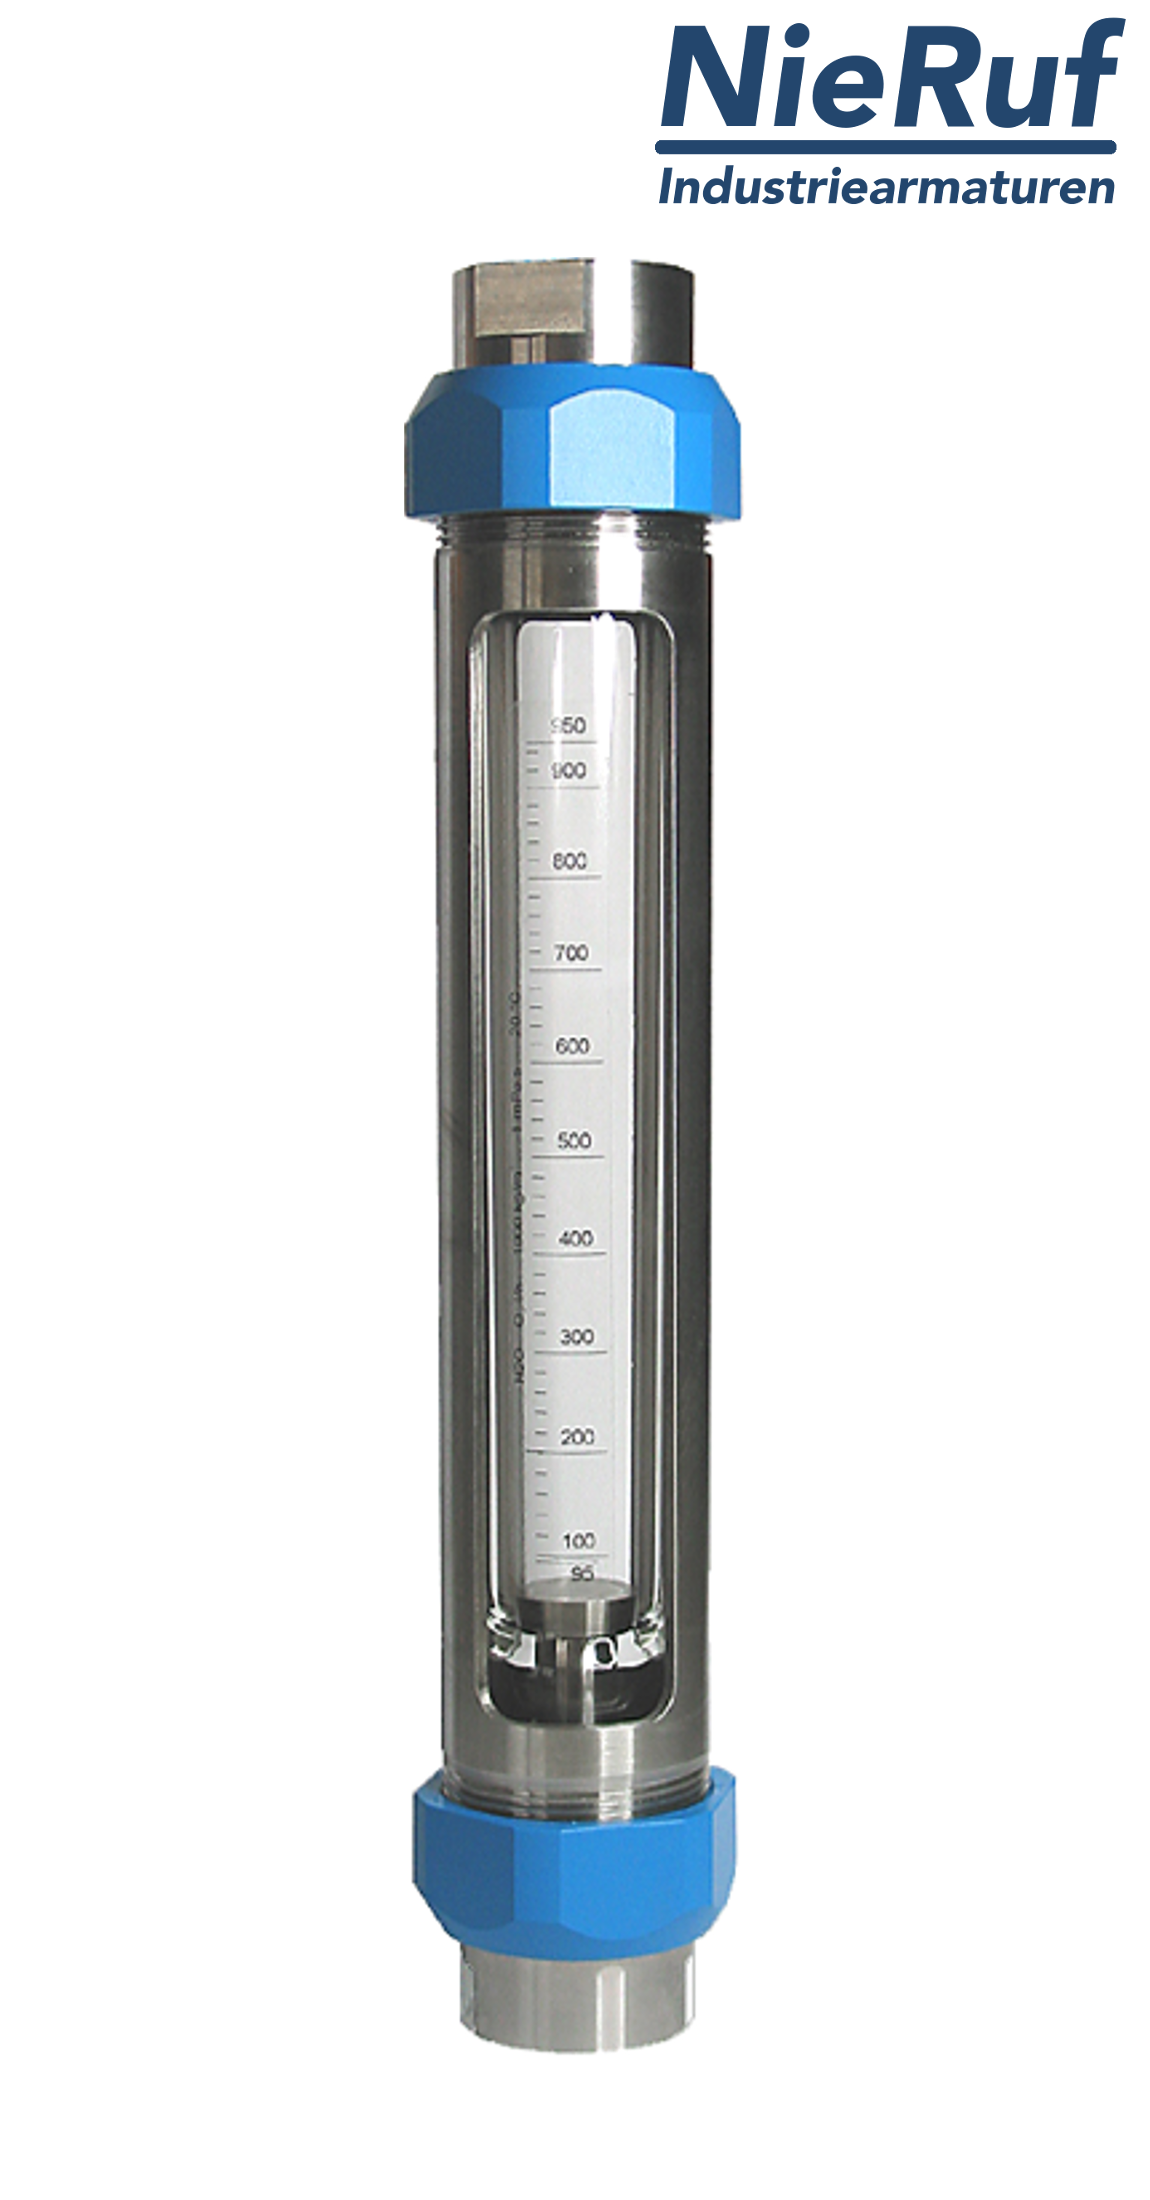 Variable area flowmeter stainless steel + borosilicate 1/4" inch 80.0 - 800 l/h air FKM